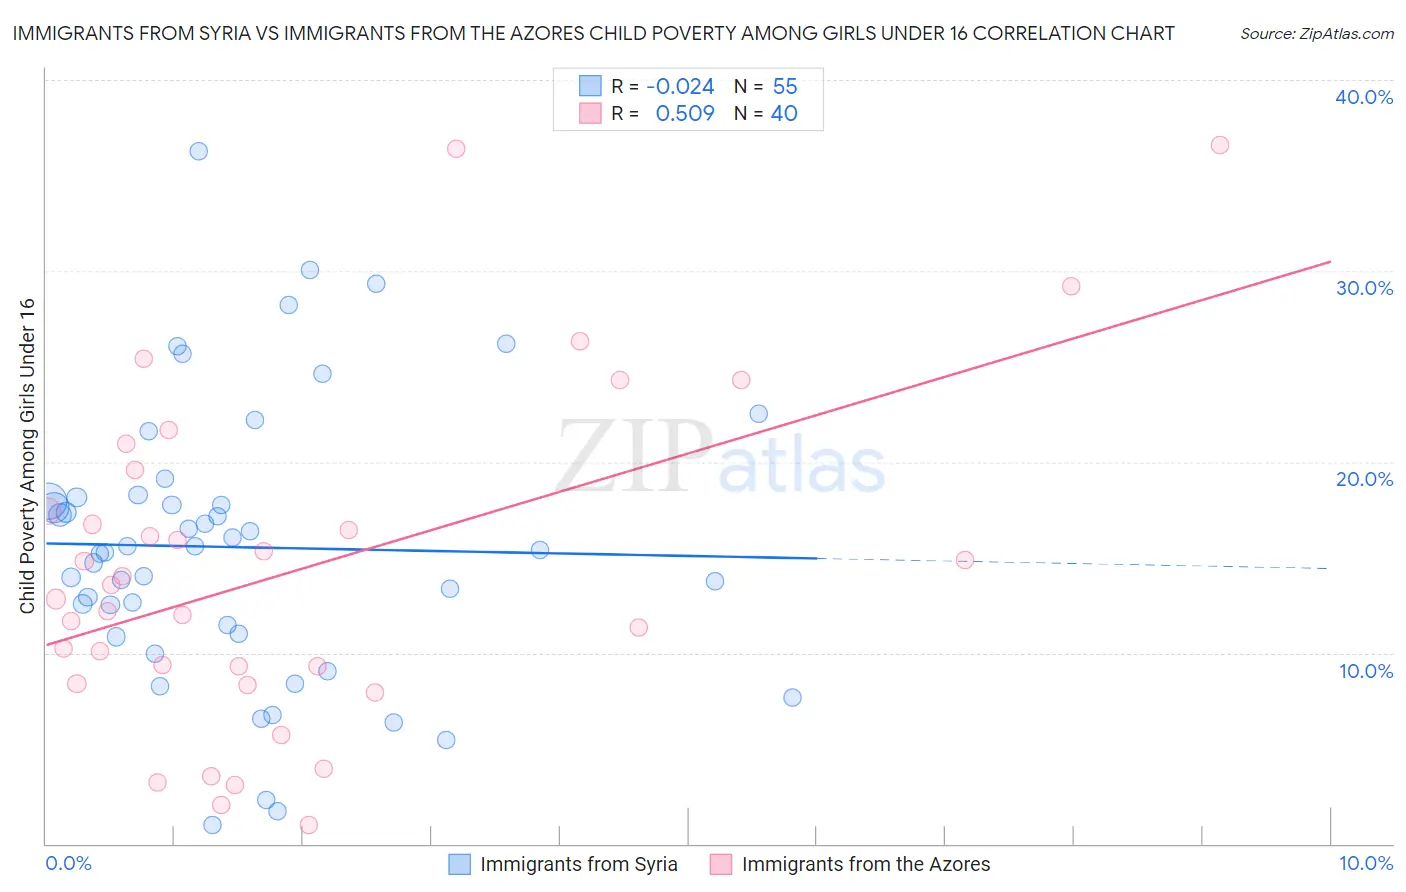 Immigrants from Syria vs Immigrants from the Azores Child Poverty Among Girls Under 16